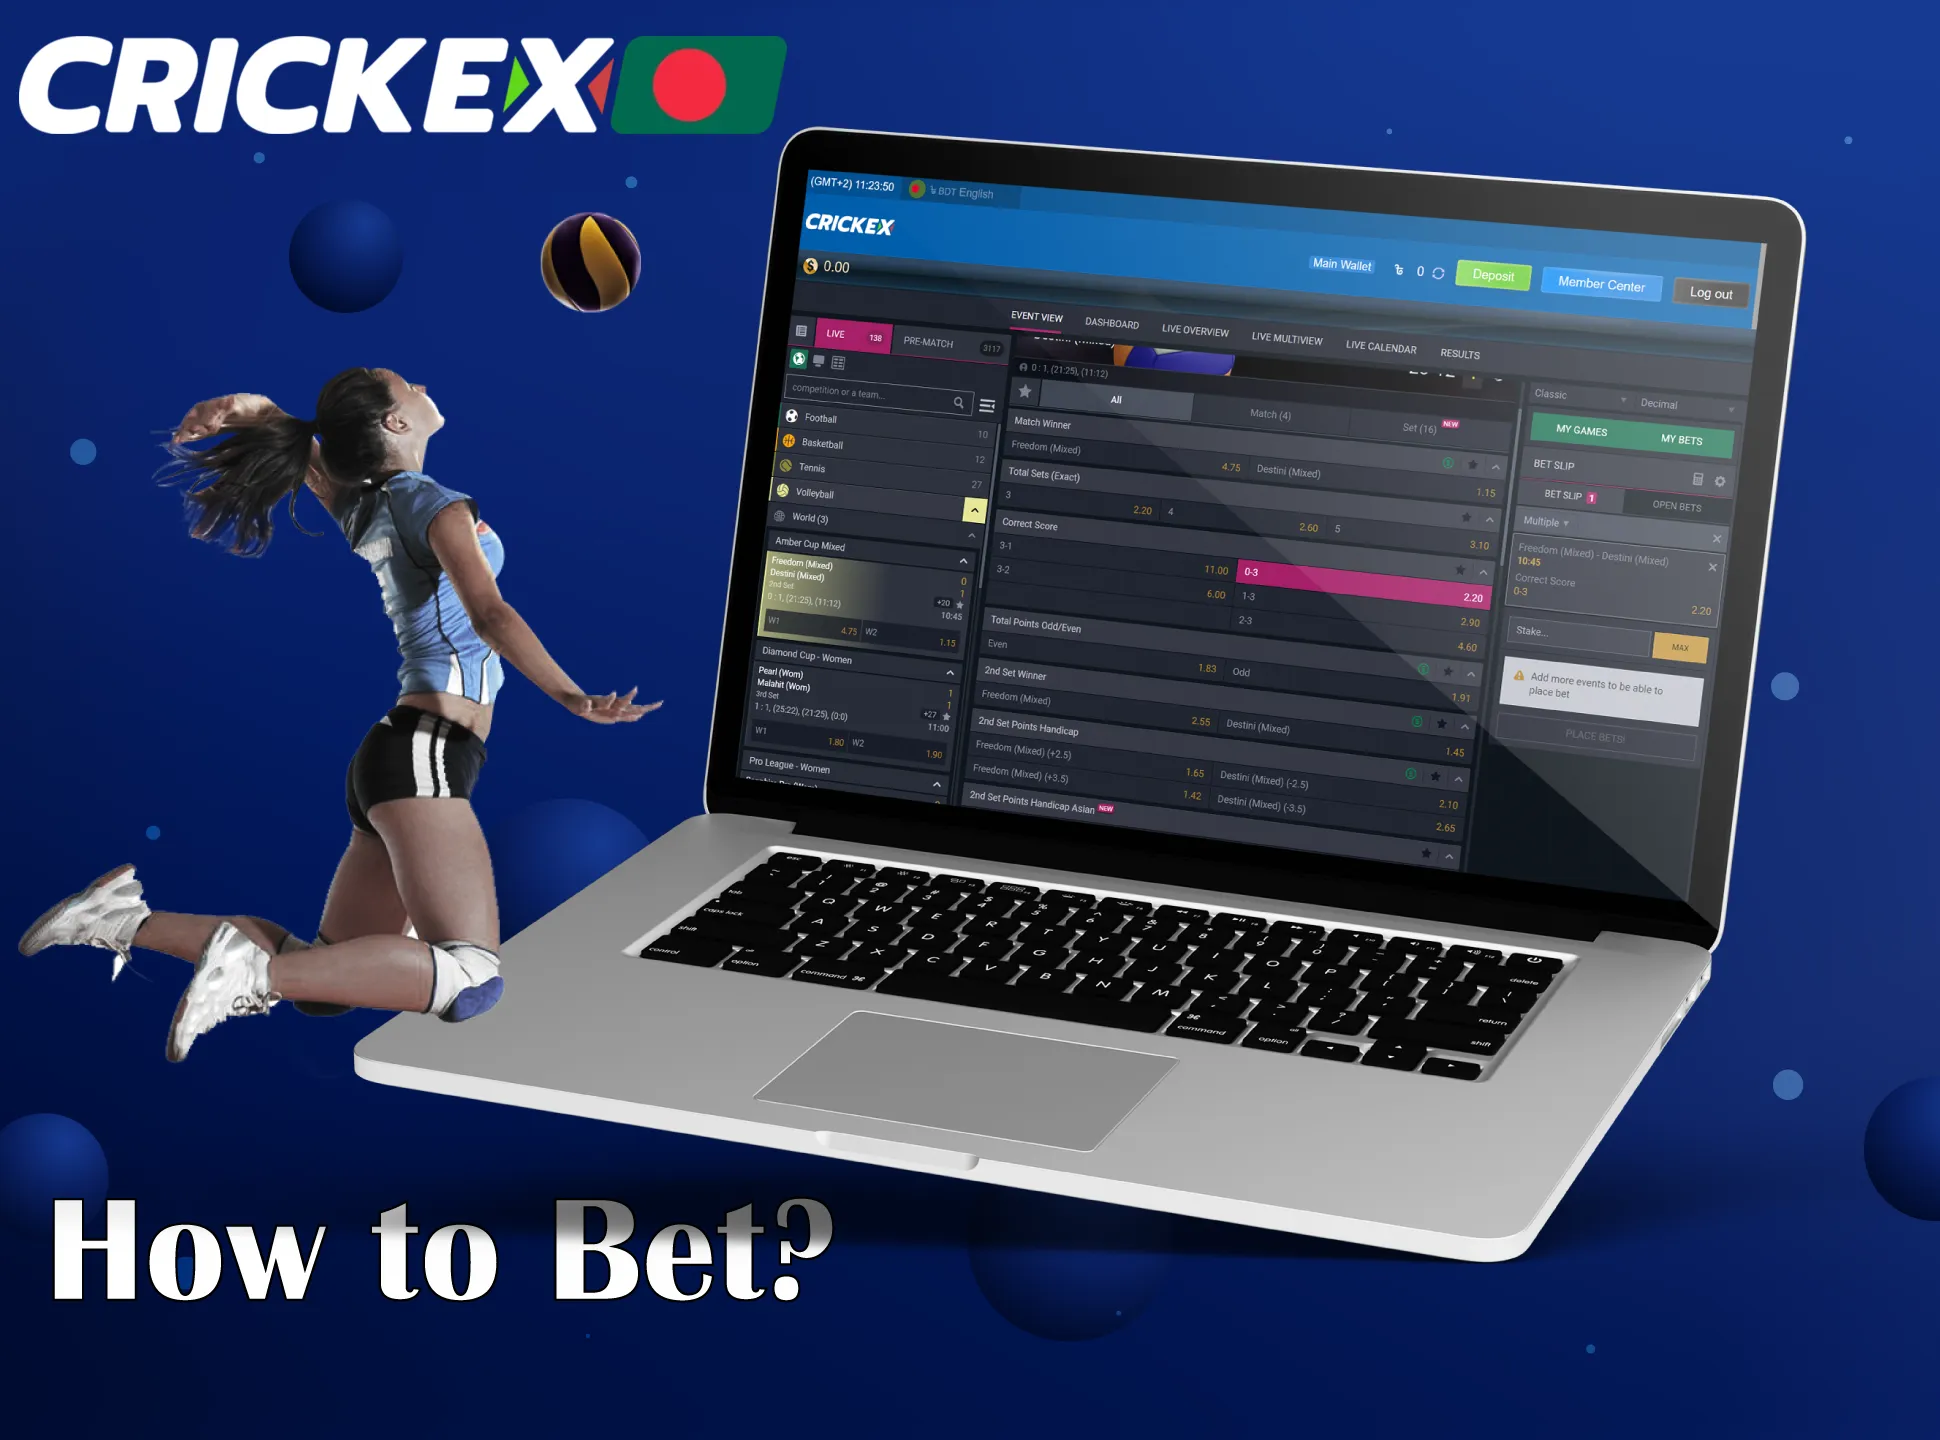 Enter on the Crickex volleyball sports betting page and make your first bet.